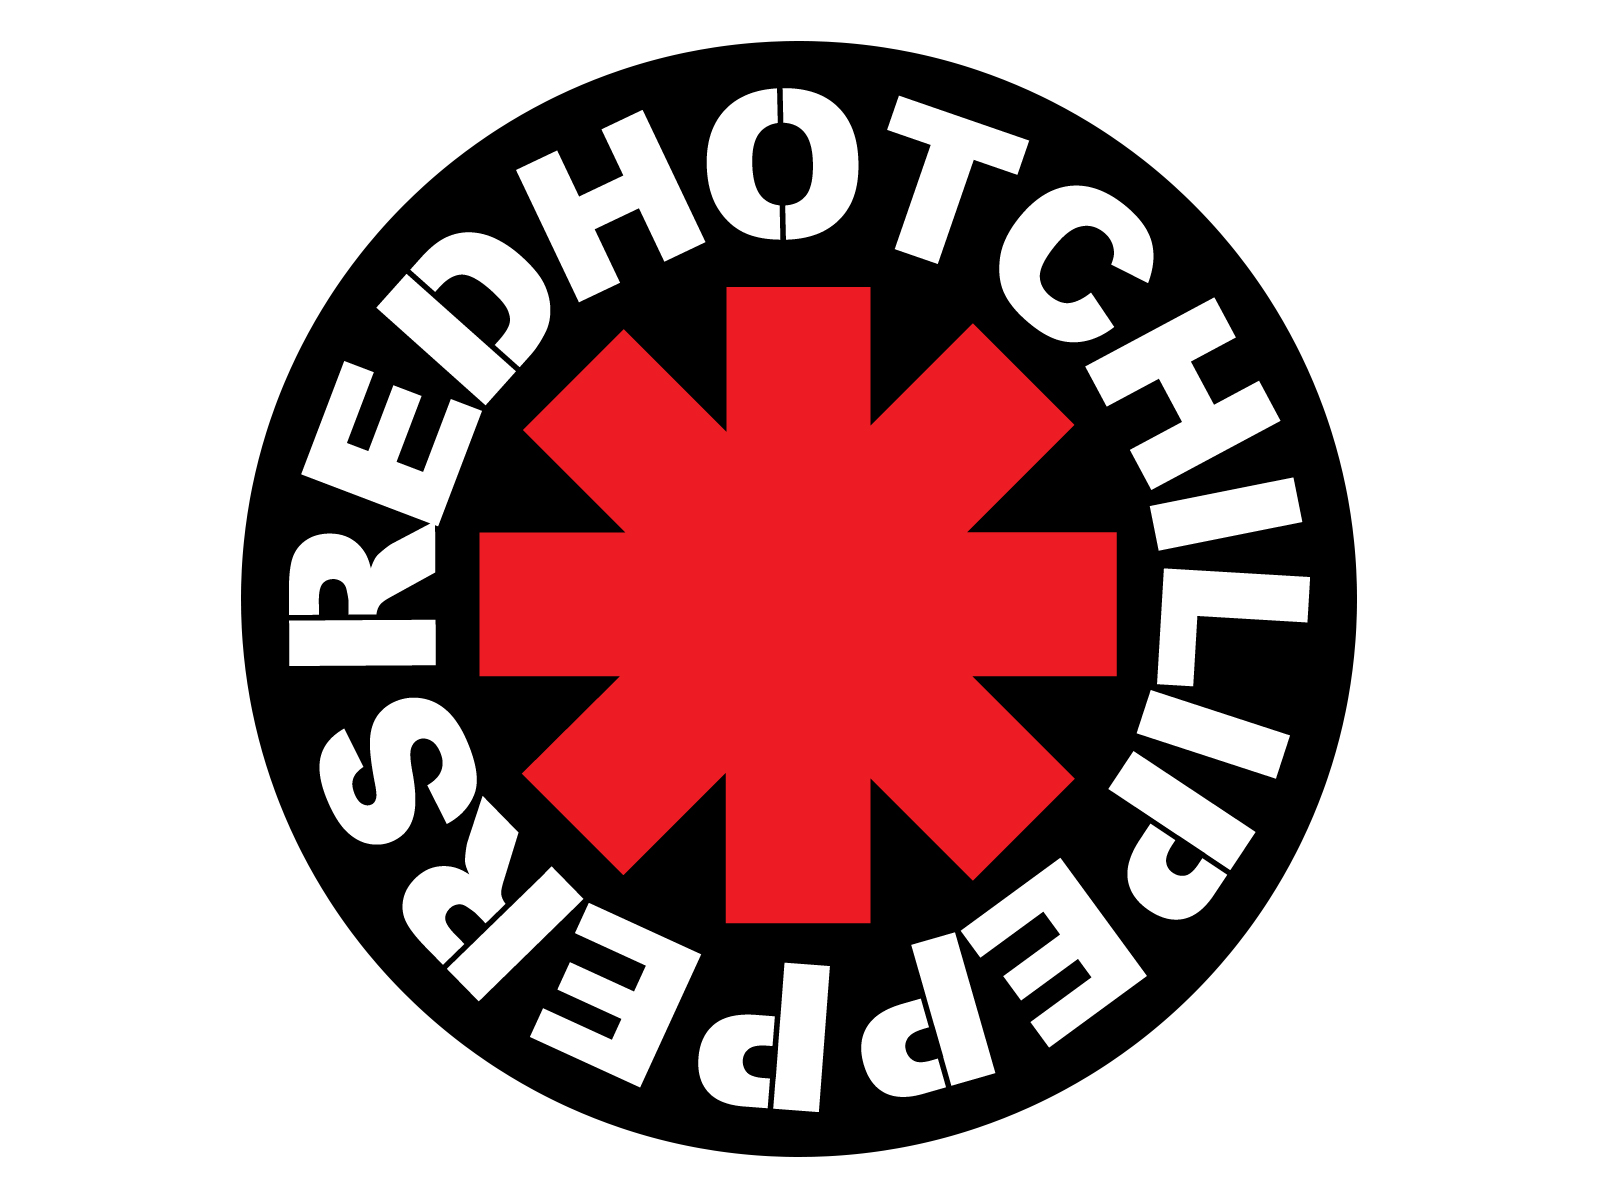 Logotipo de Red Hot Chili Peppers